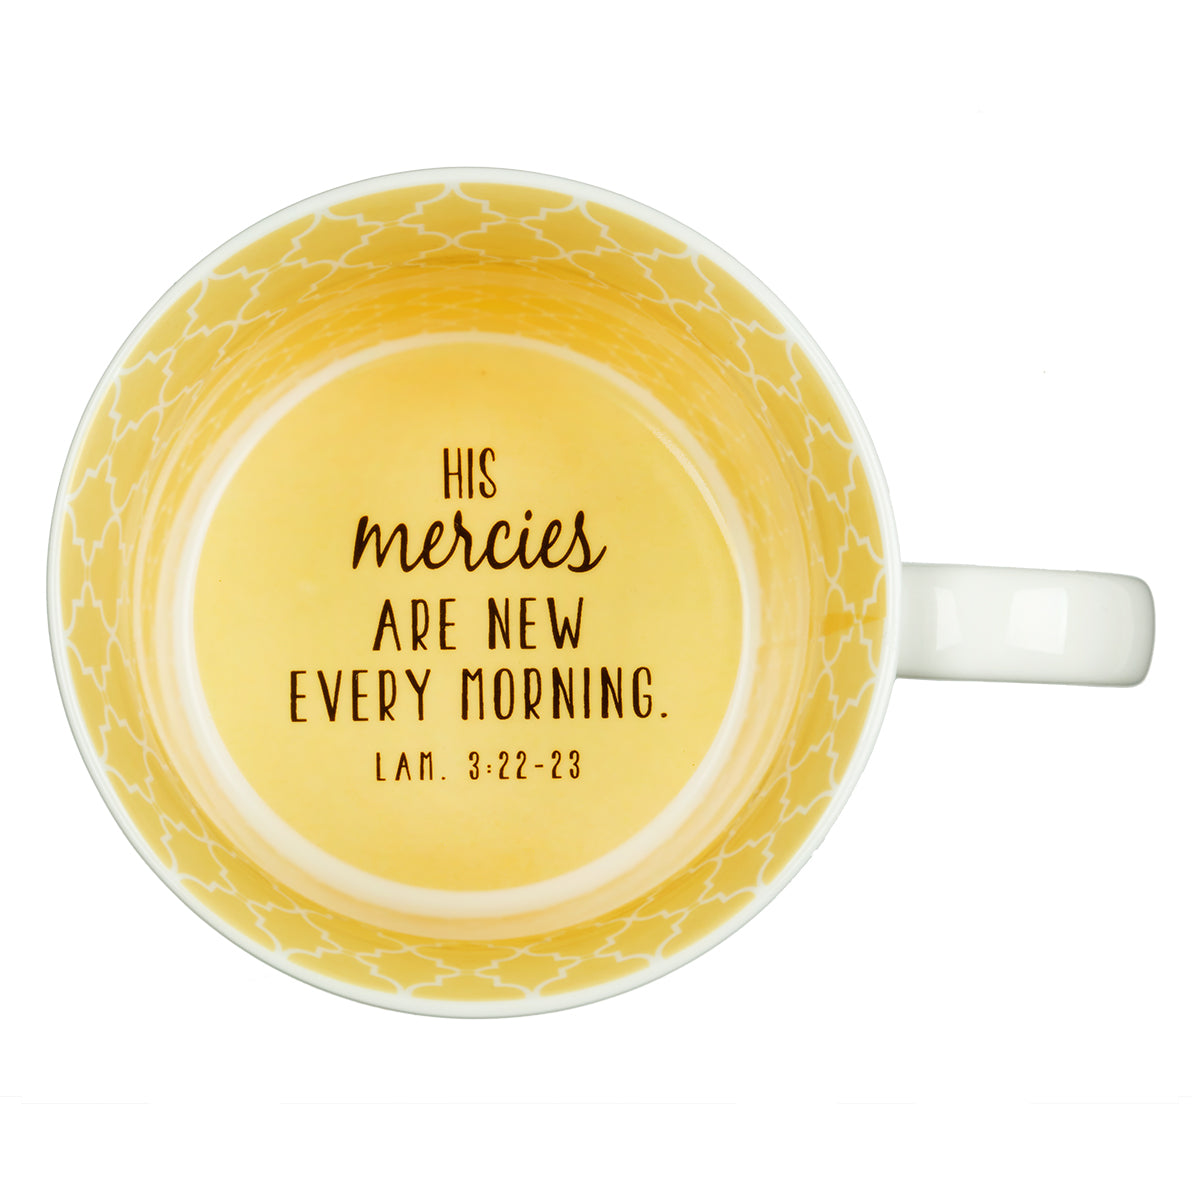 Image of Cup of Sunshine Lamentations 3:22-23 Coffee Mug other